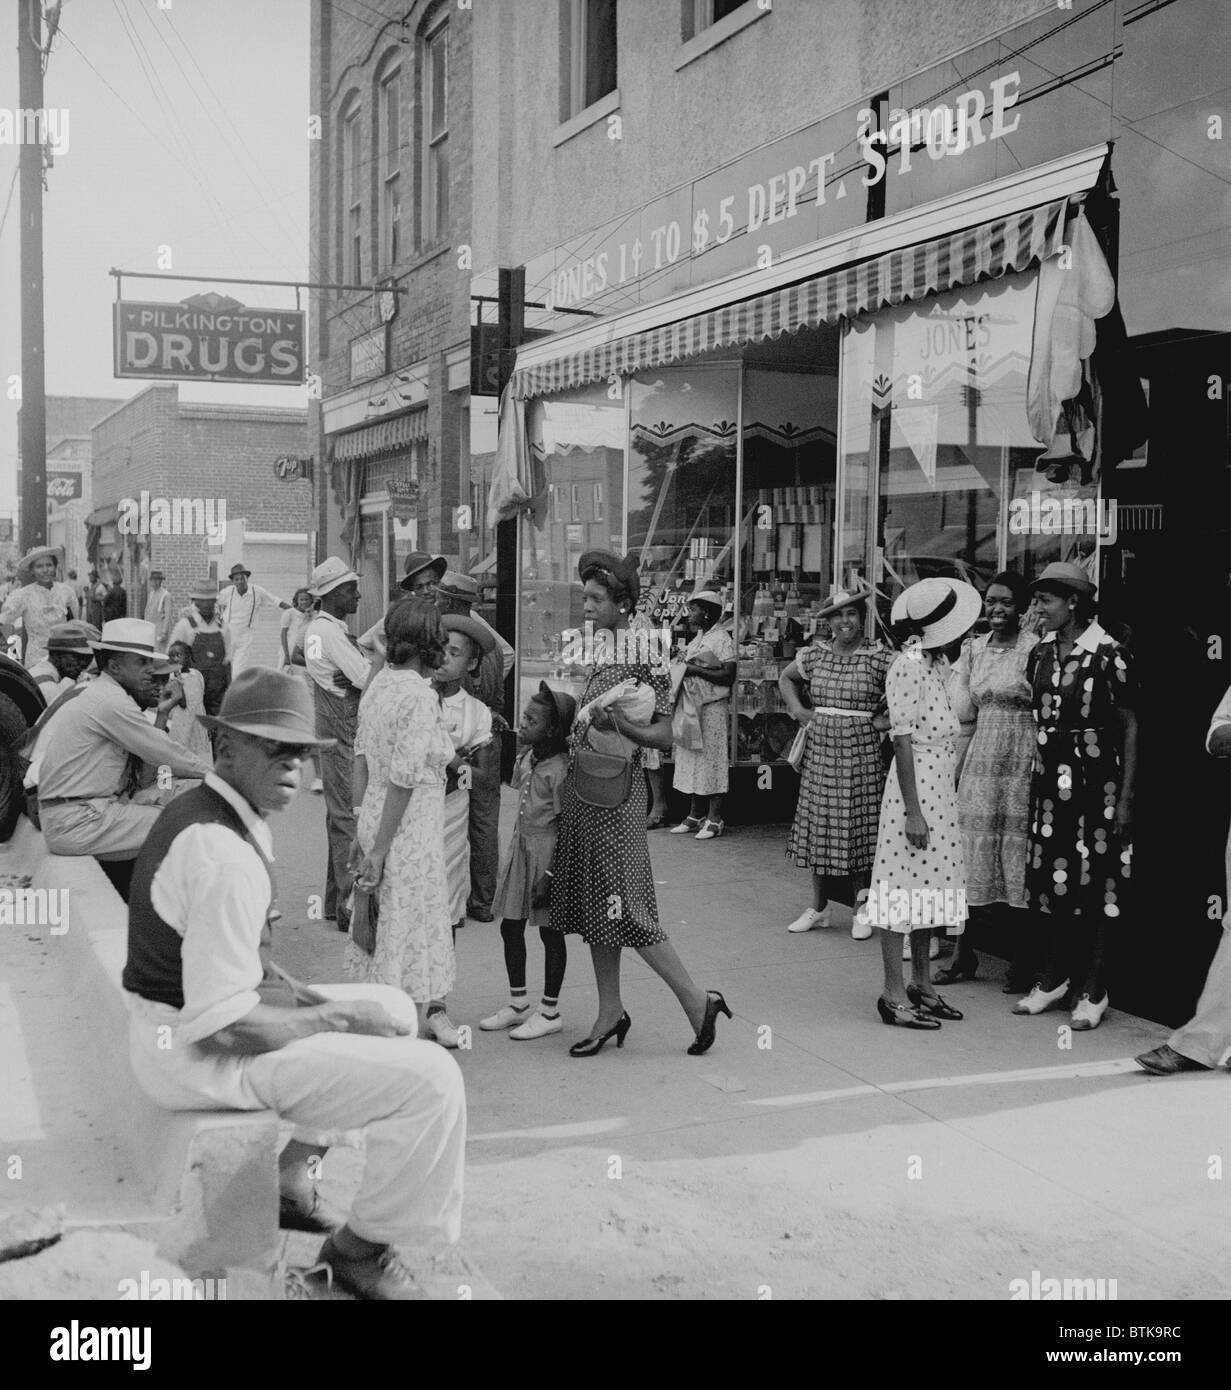 African Americans shopping and visiting on main street of Pittsboro, North Carolina. Dorothea Lange photo from 1939, shows an optimistic view of African American life in Jim Crow South. Stock Photo